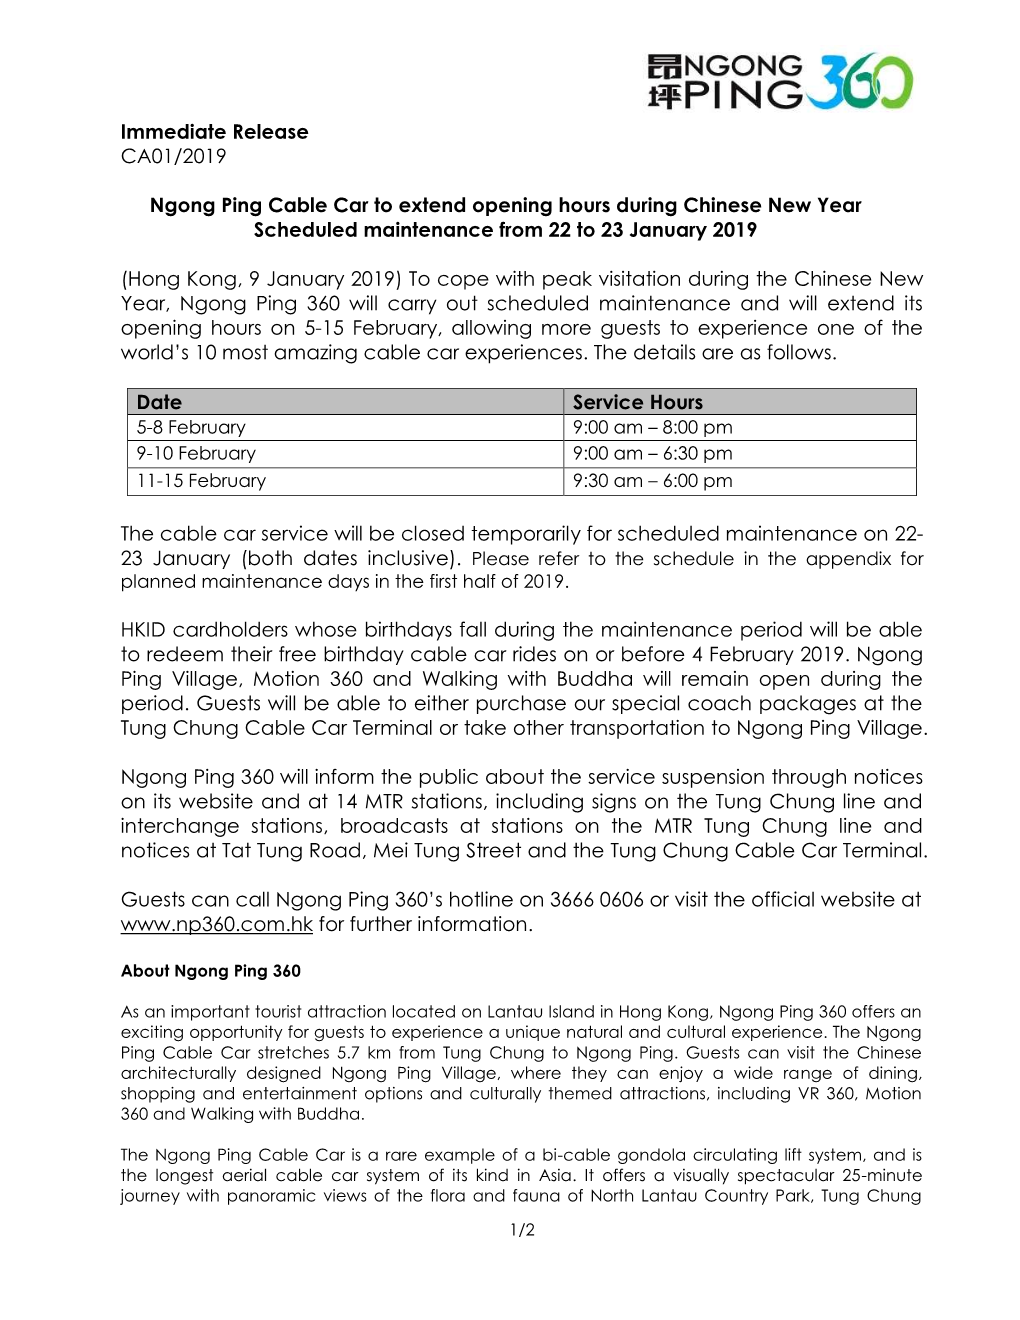 Immediate Release CA01/2019 Ngong Ping Cable Car to Extend